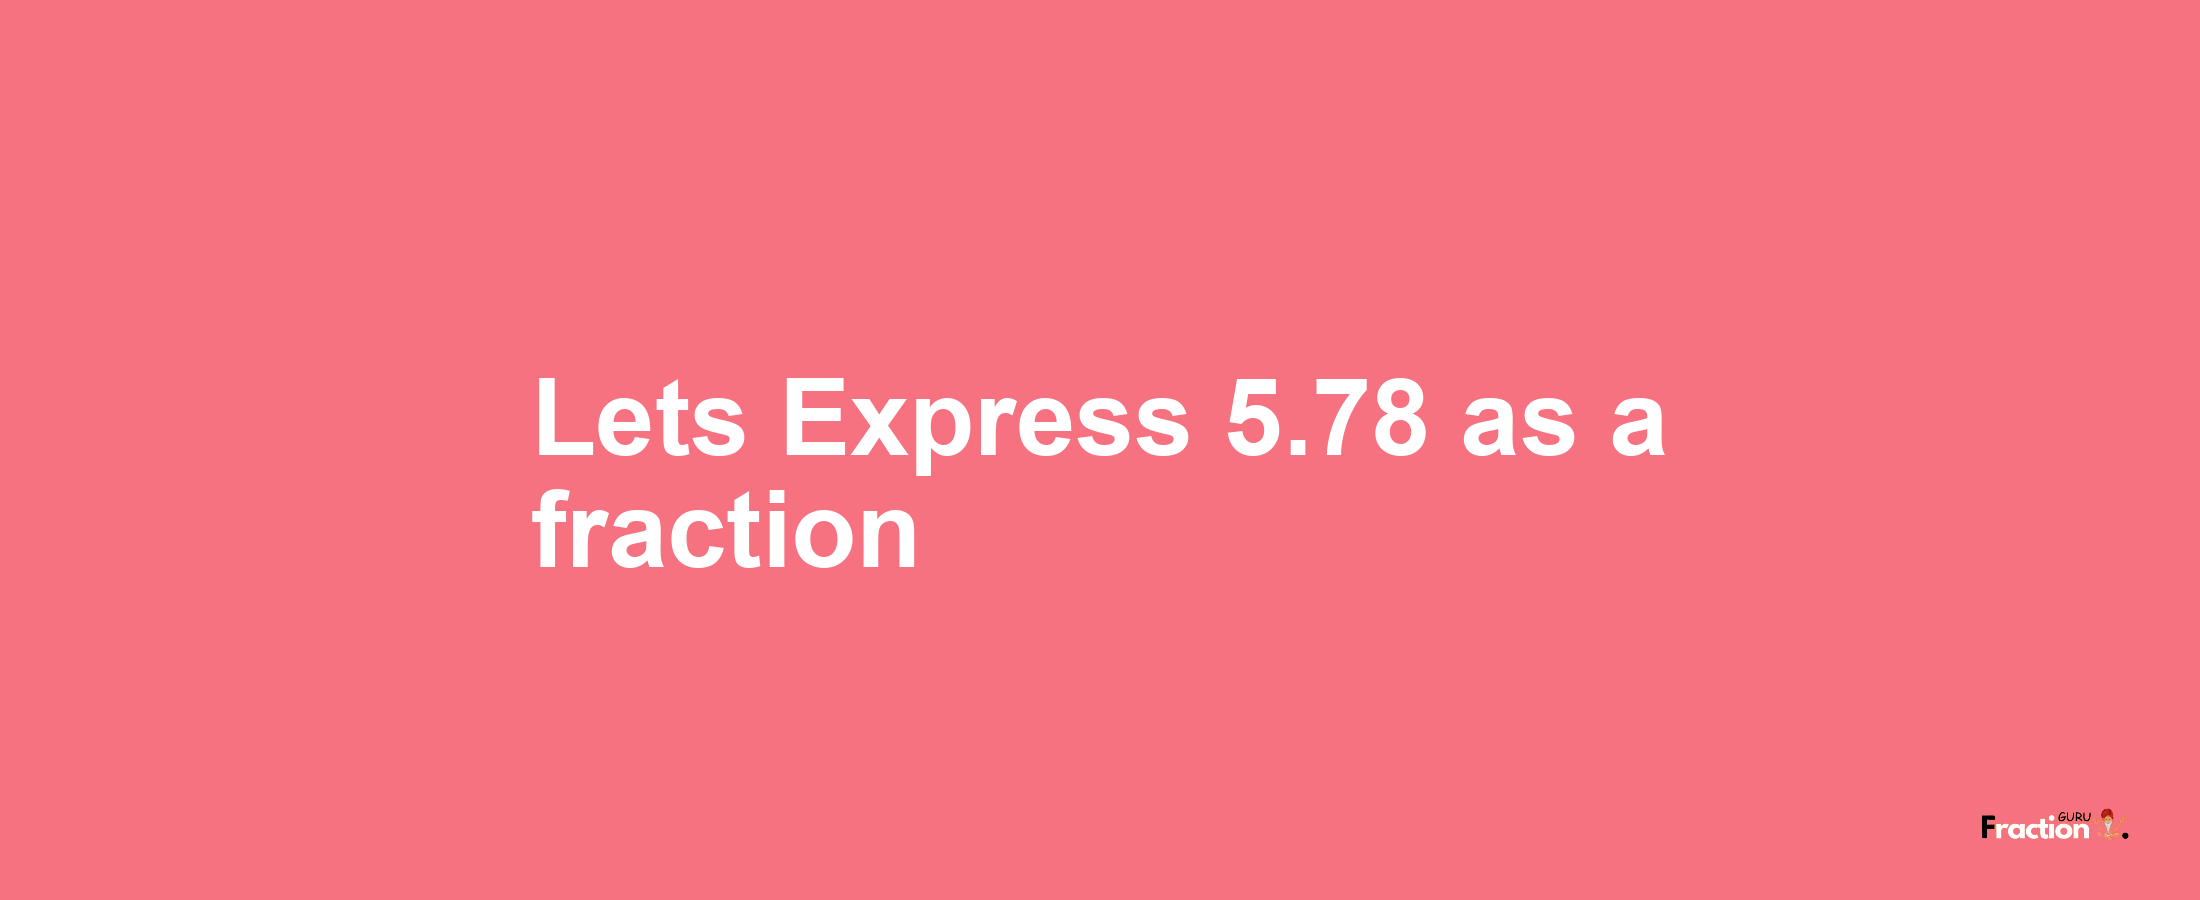 Lets Express 5.78 as afraction